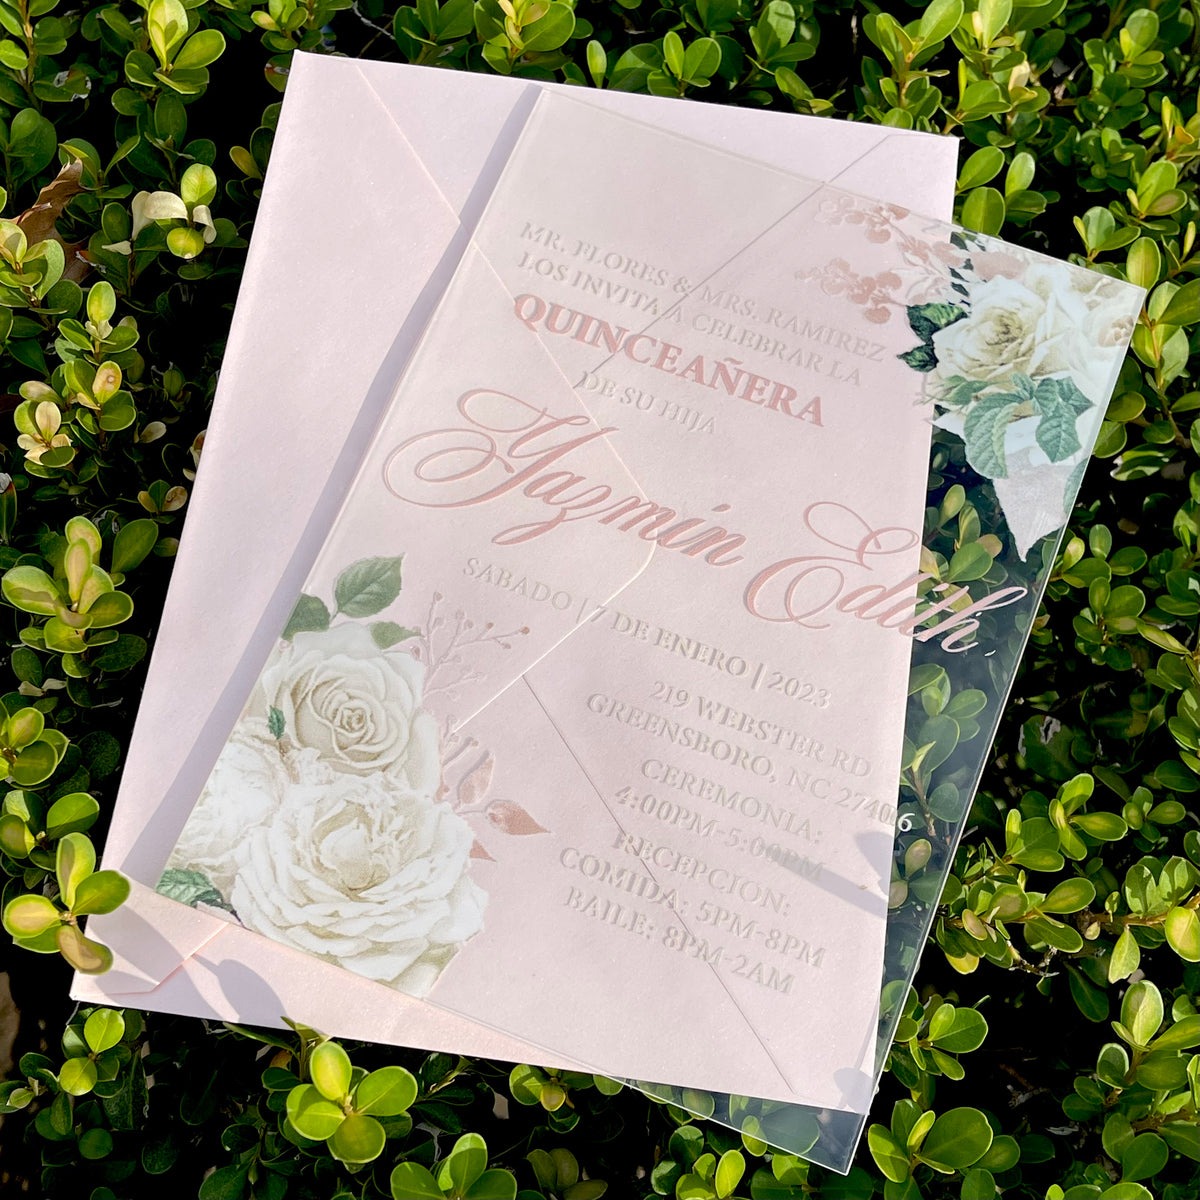 Frosted Acrylic Greenery Wedding Invitation – Invitations by Luis Sanchez